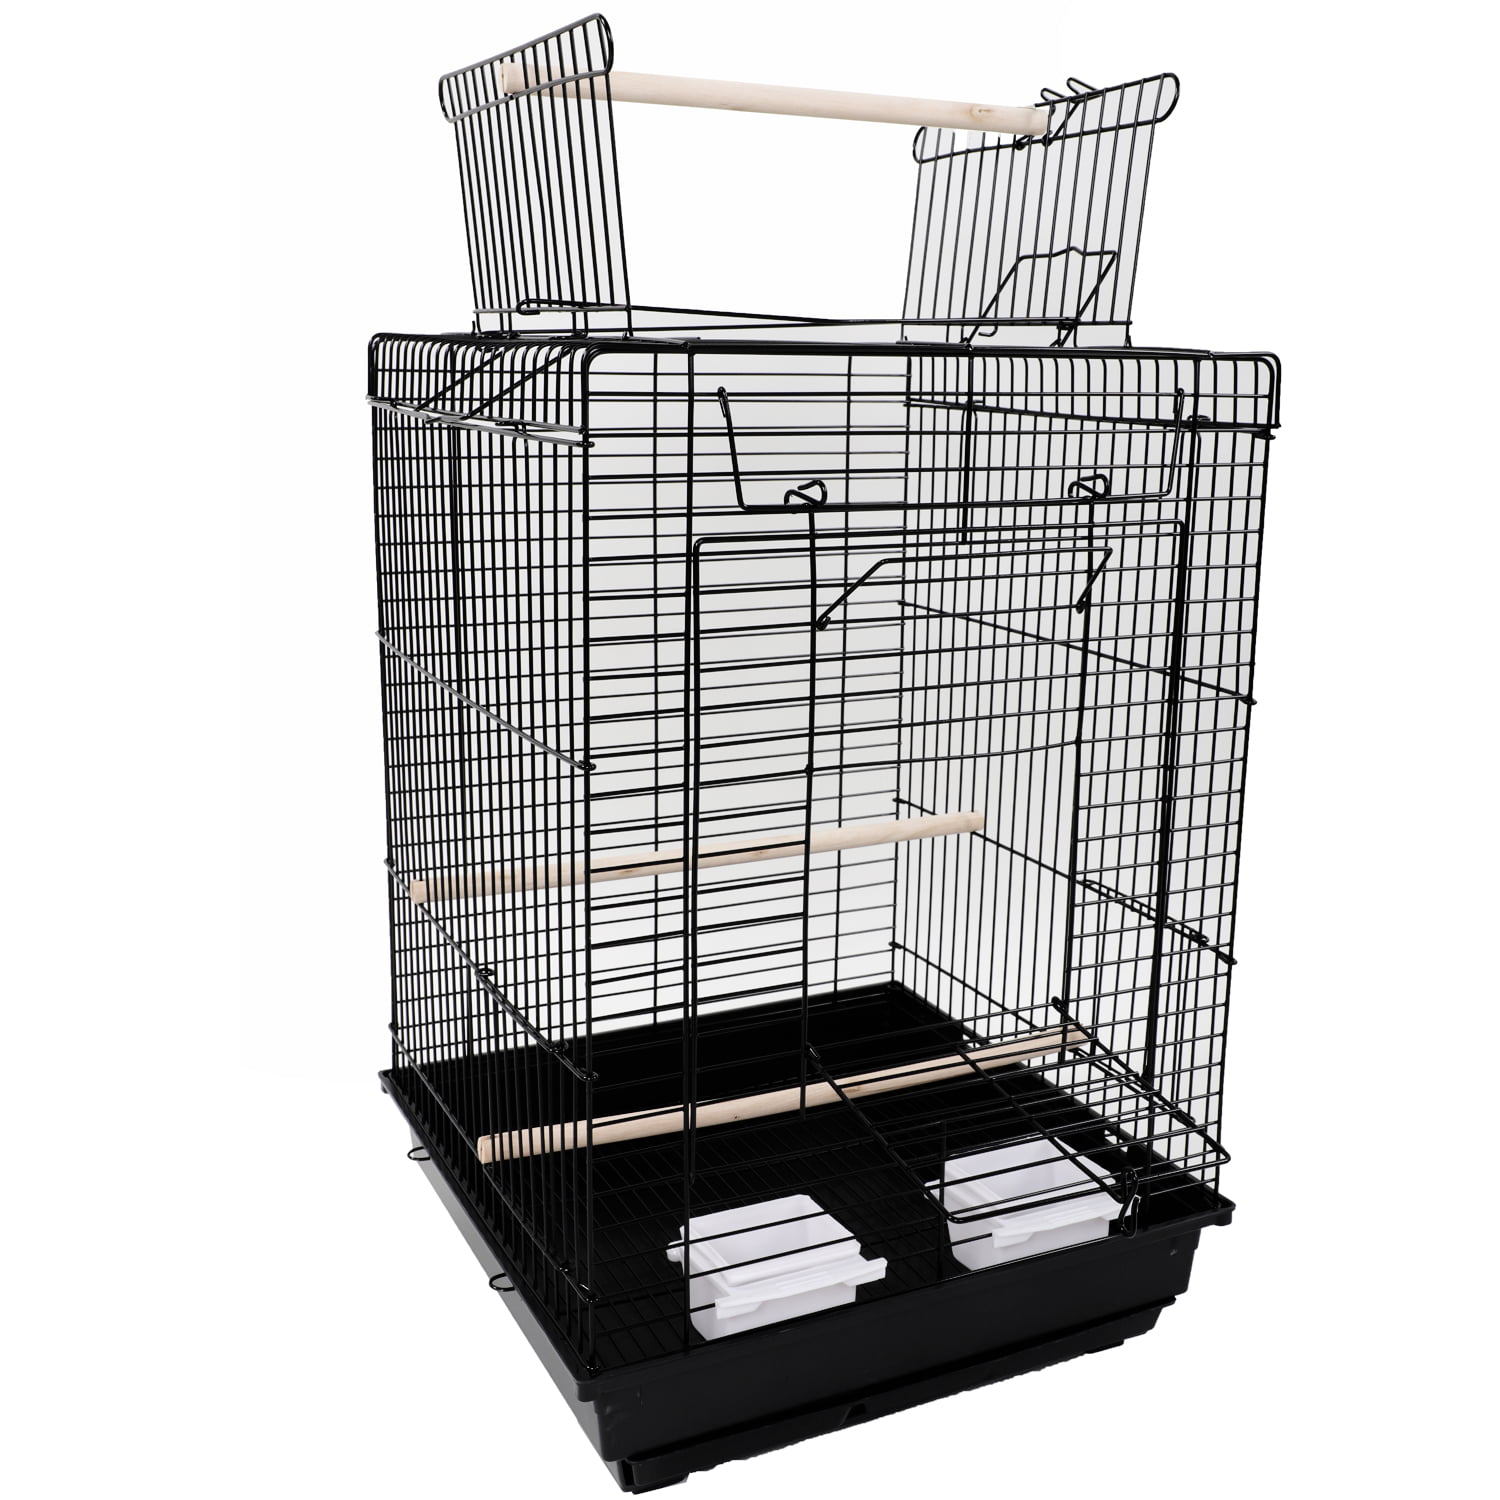 23" Portable Bird Cage Pet Supplies Metal Cage with Open Play Top Black 